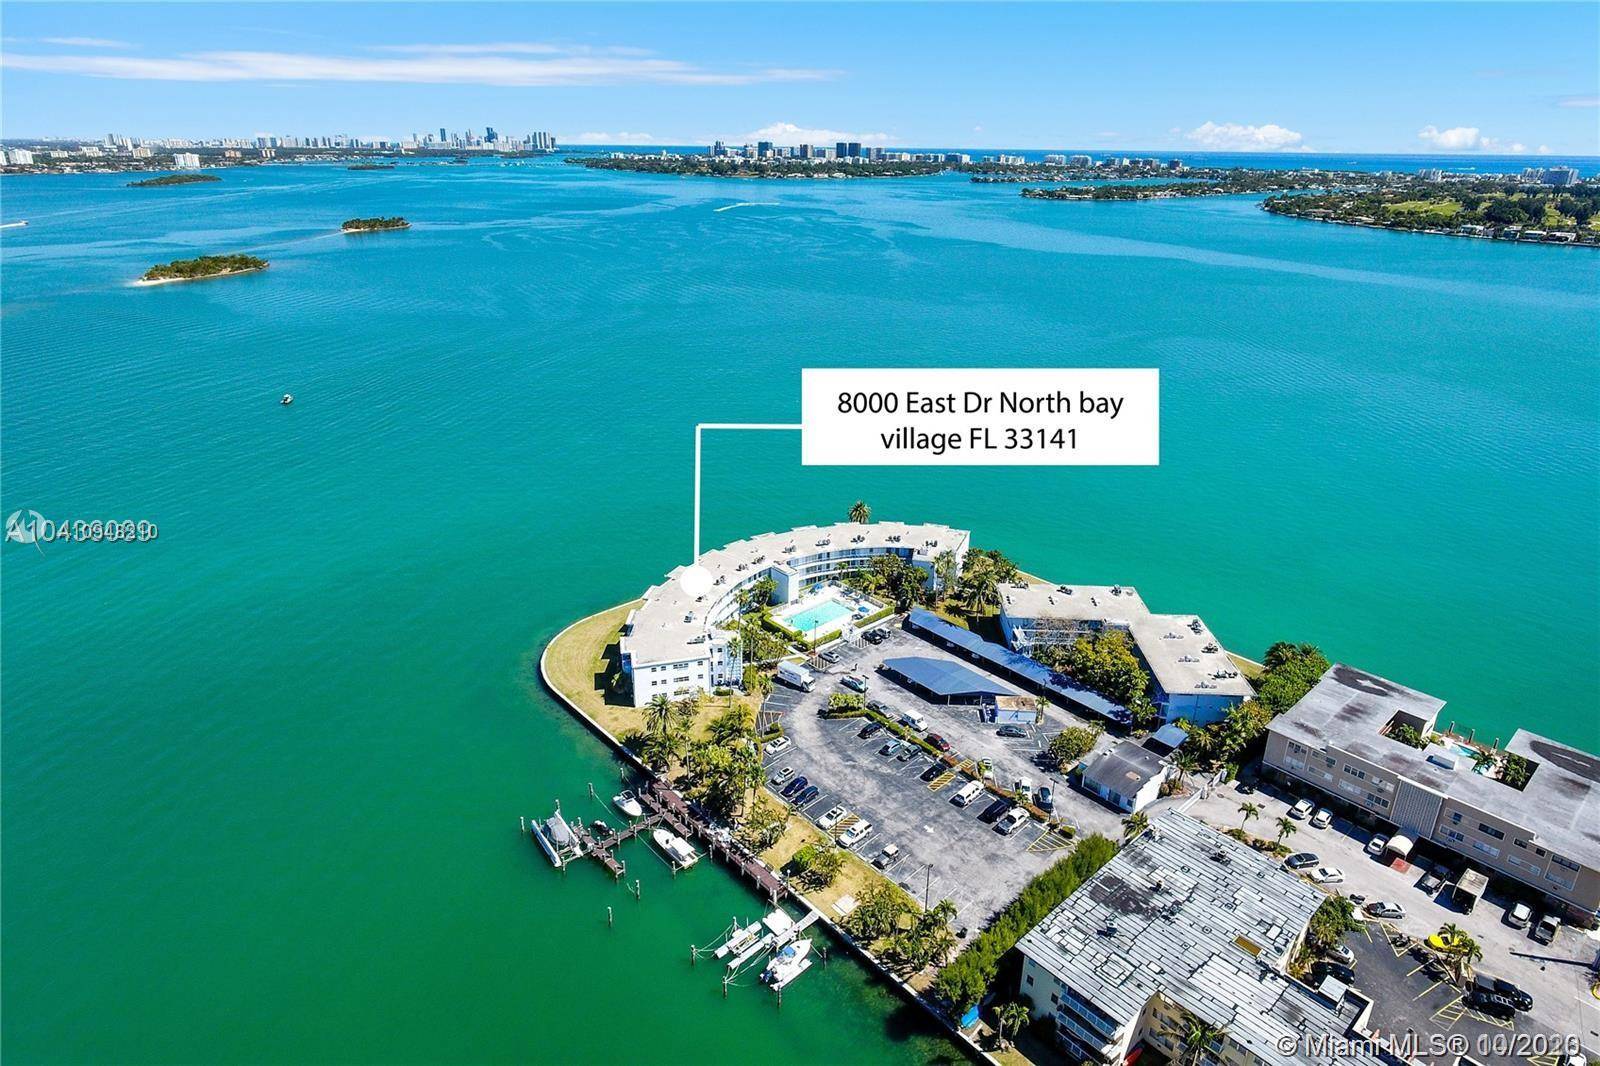 Biscayne Sea Club Community and Bay Four 51 apartments 2 bedrooms and 2 bathrooms, one unit with 3 bedrooms and 3 bathroom and other unit one bedroom and one bathroom.